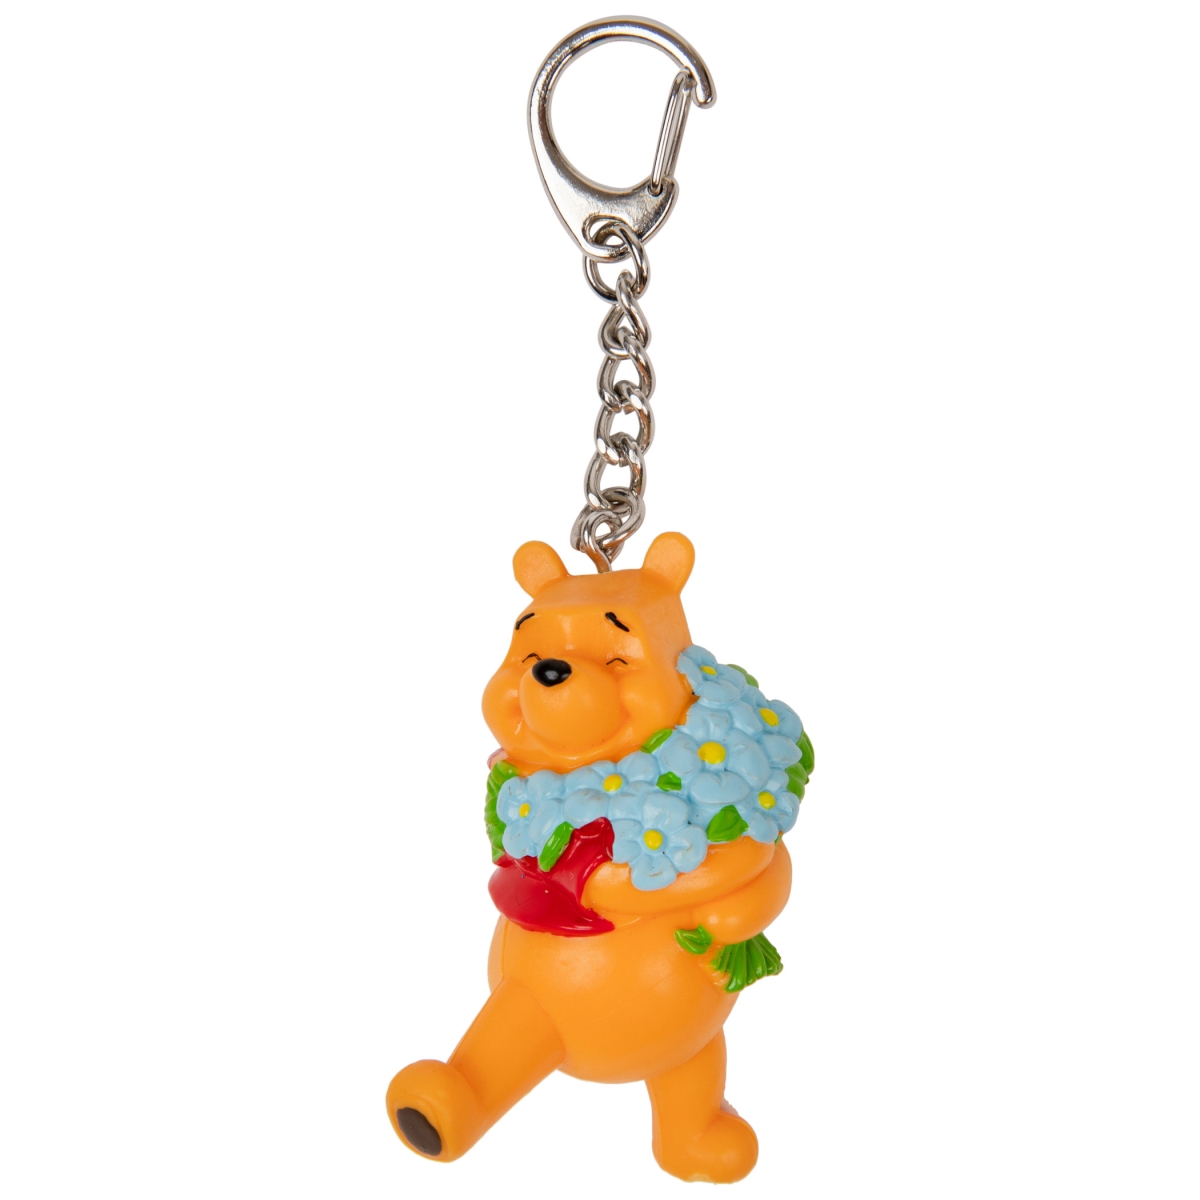 Picture of Winnie the Pooh 826288 Winnie The Pooh Plastic Keychain, Yellow